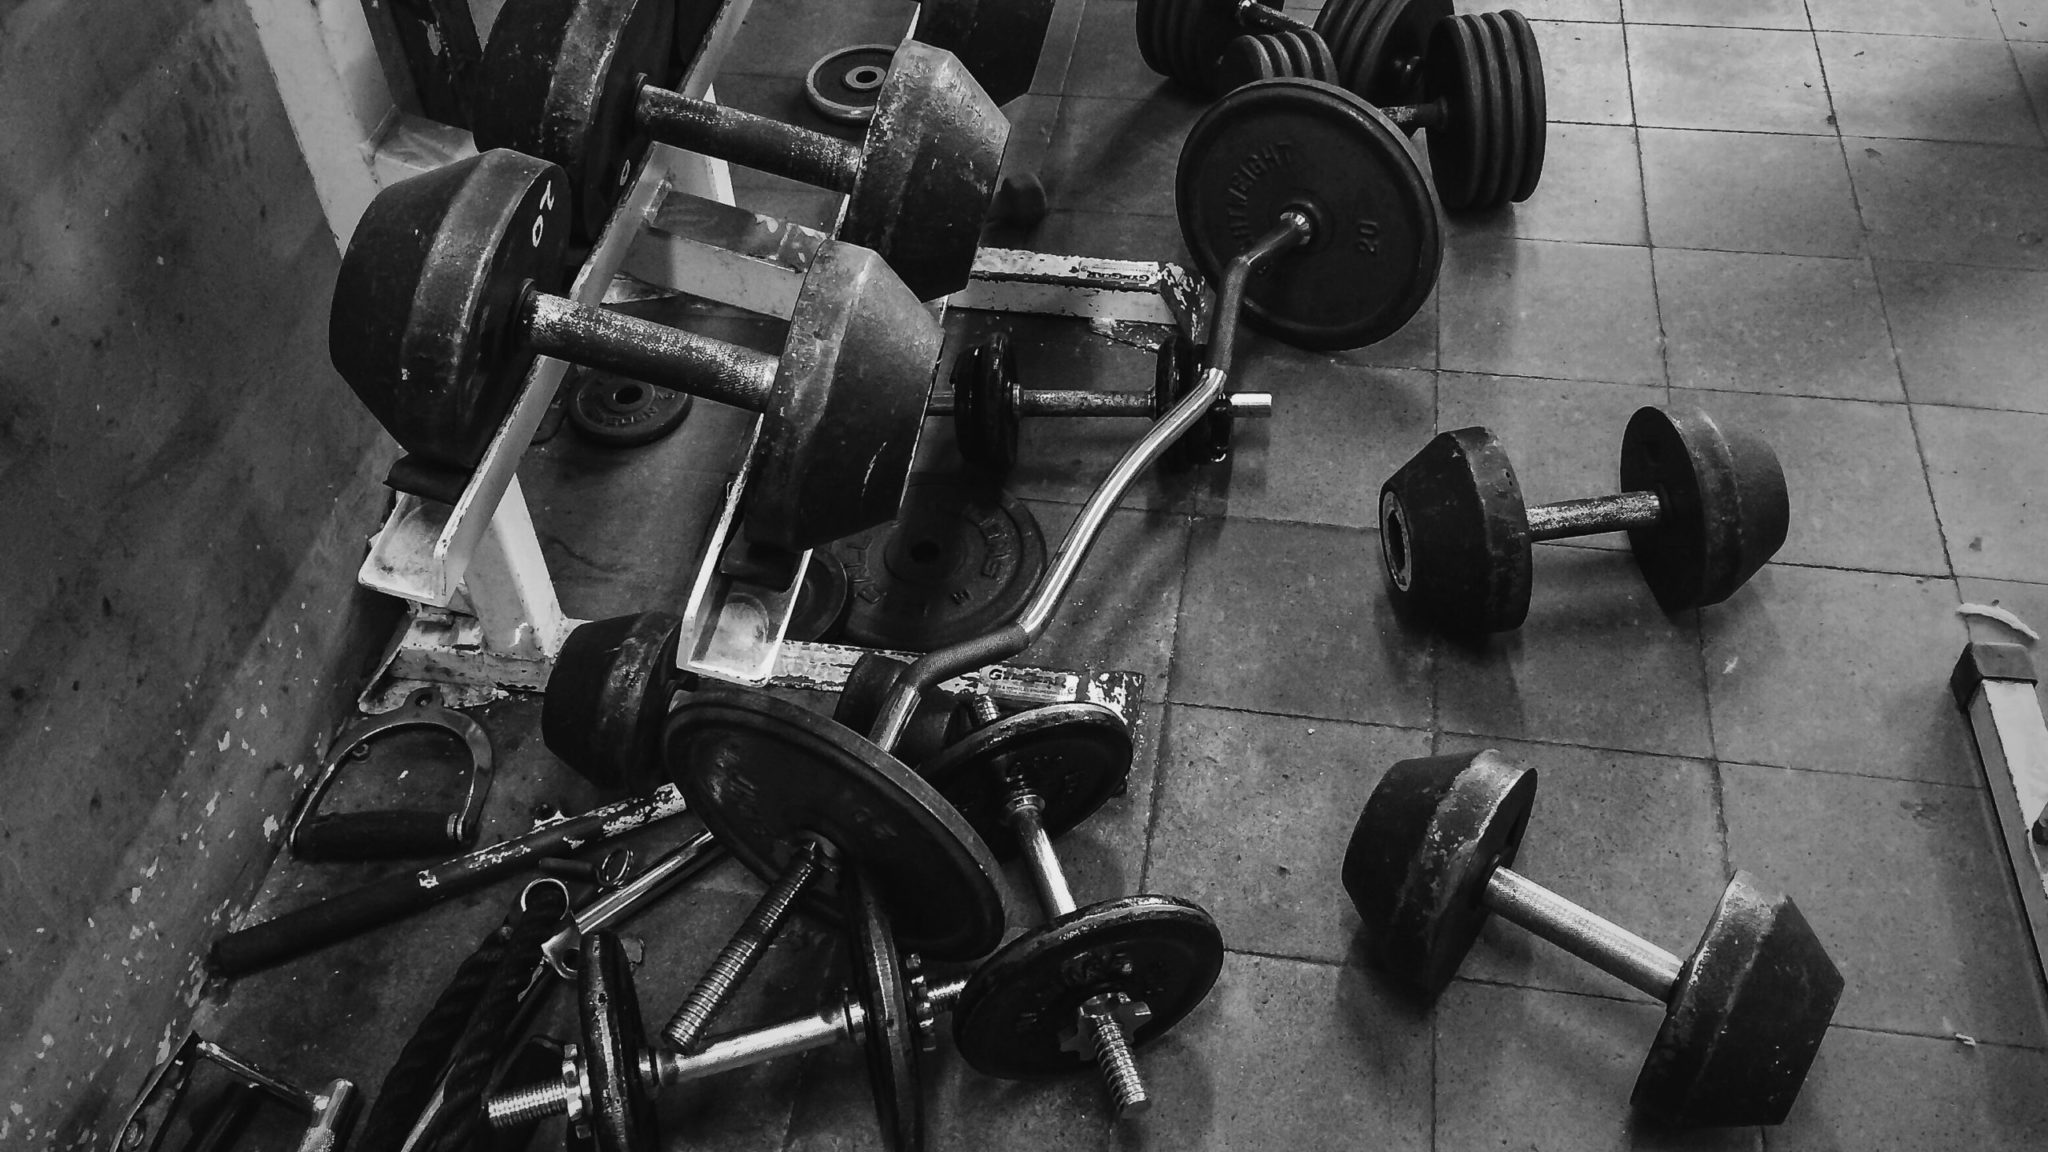 Dumbbells on Rack and Weights on Floor in Gym